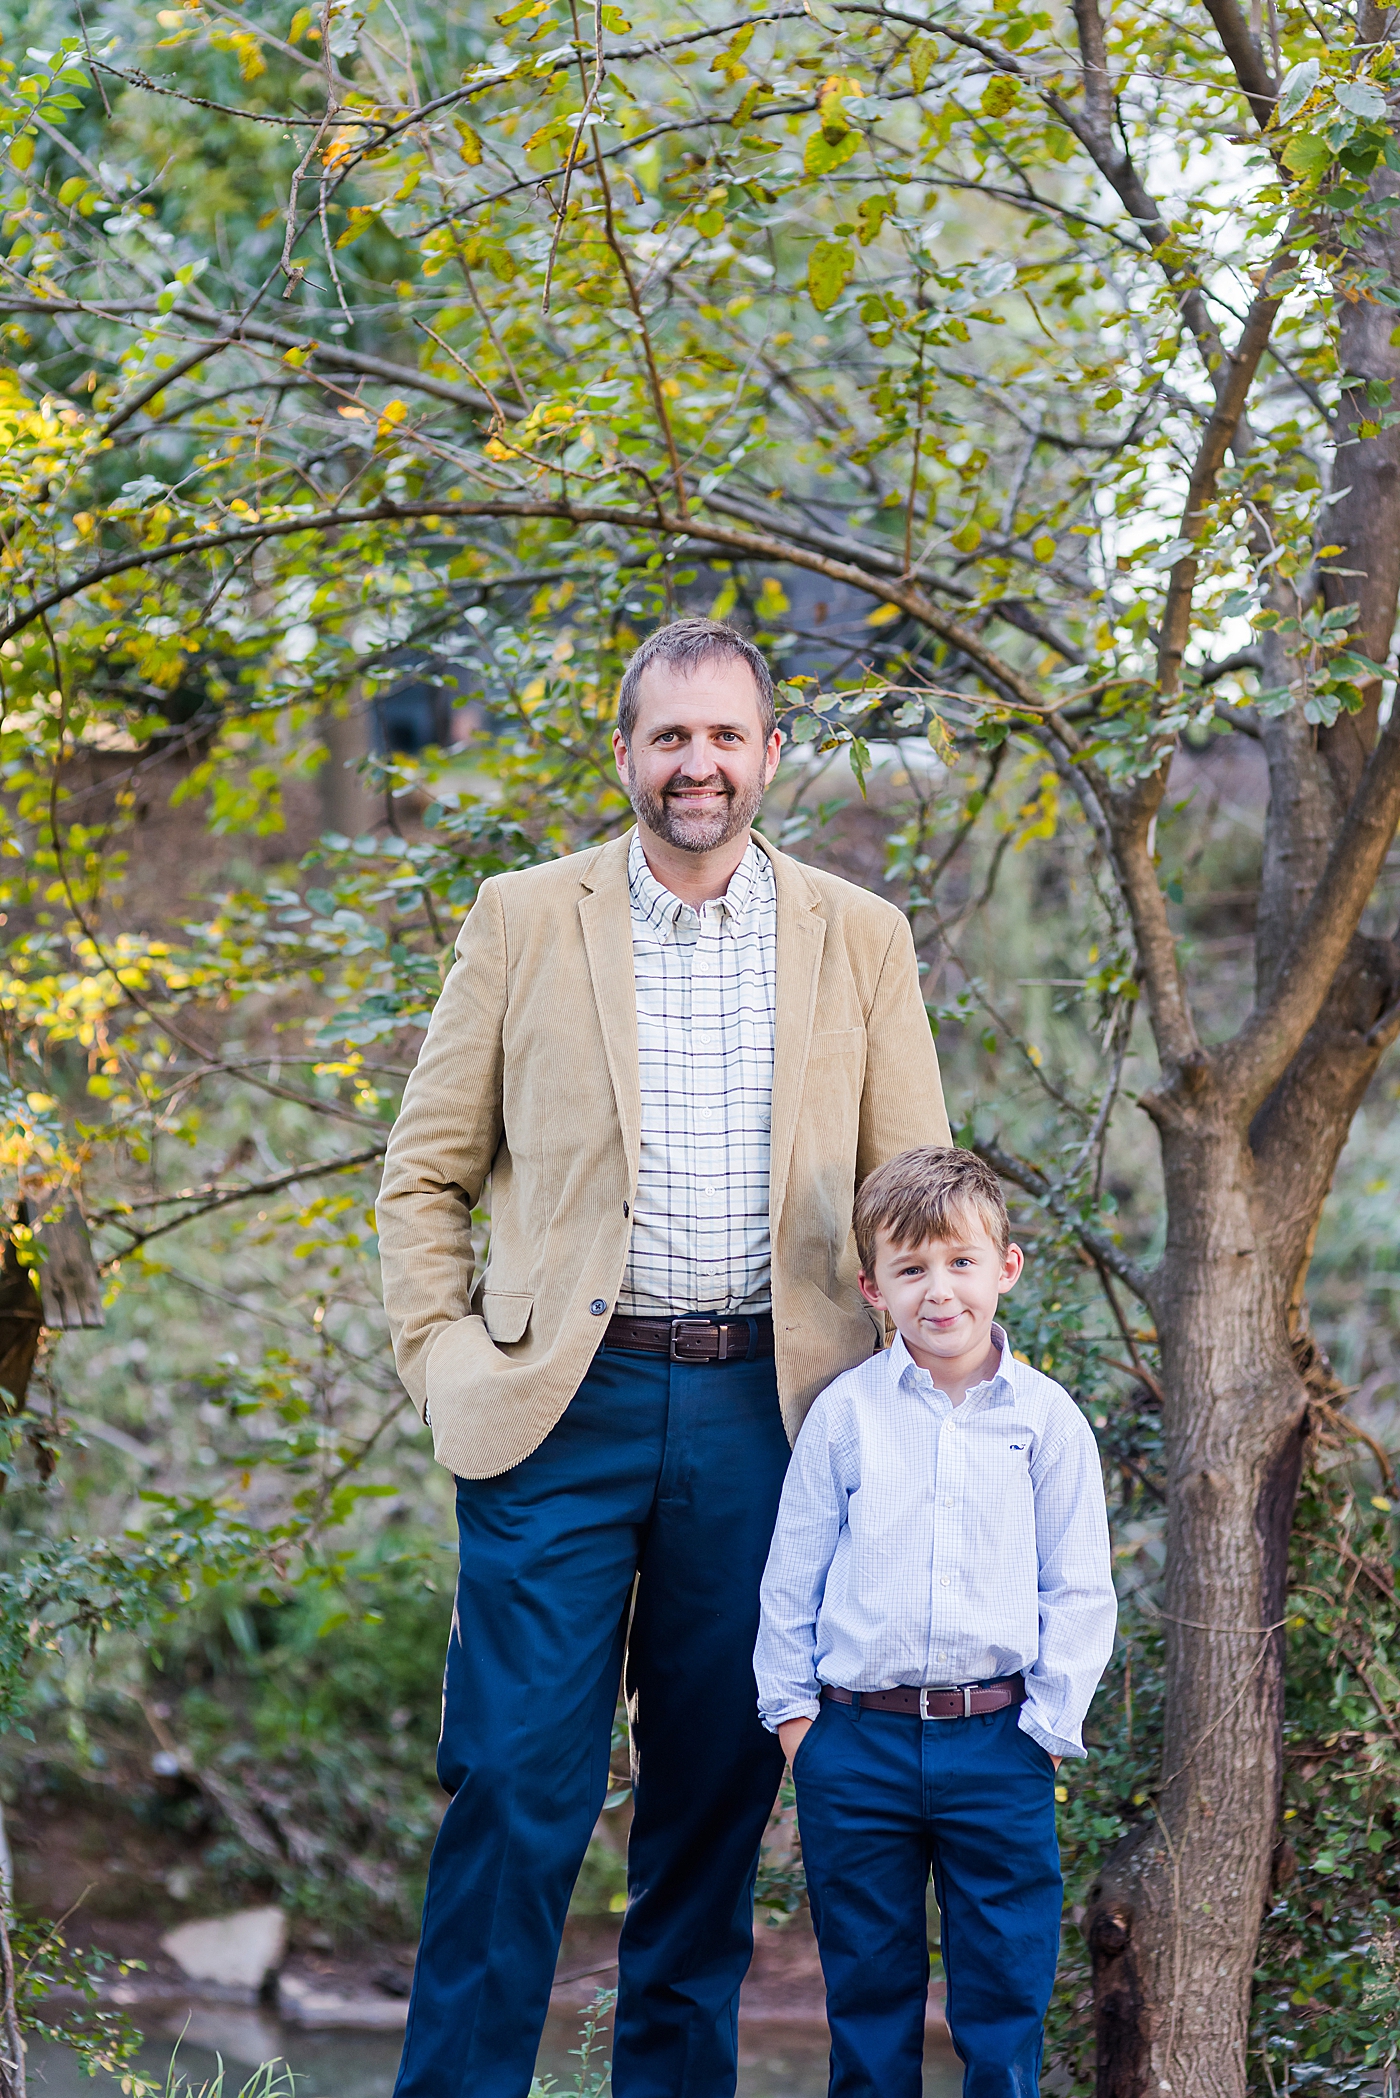 Dad and son in the park | Photo by Charlotte Family Photographer Anna Wisjo